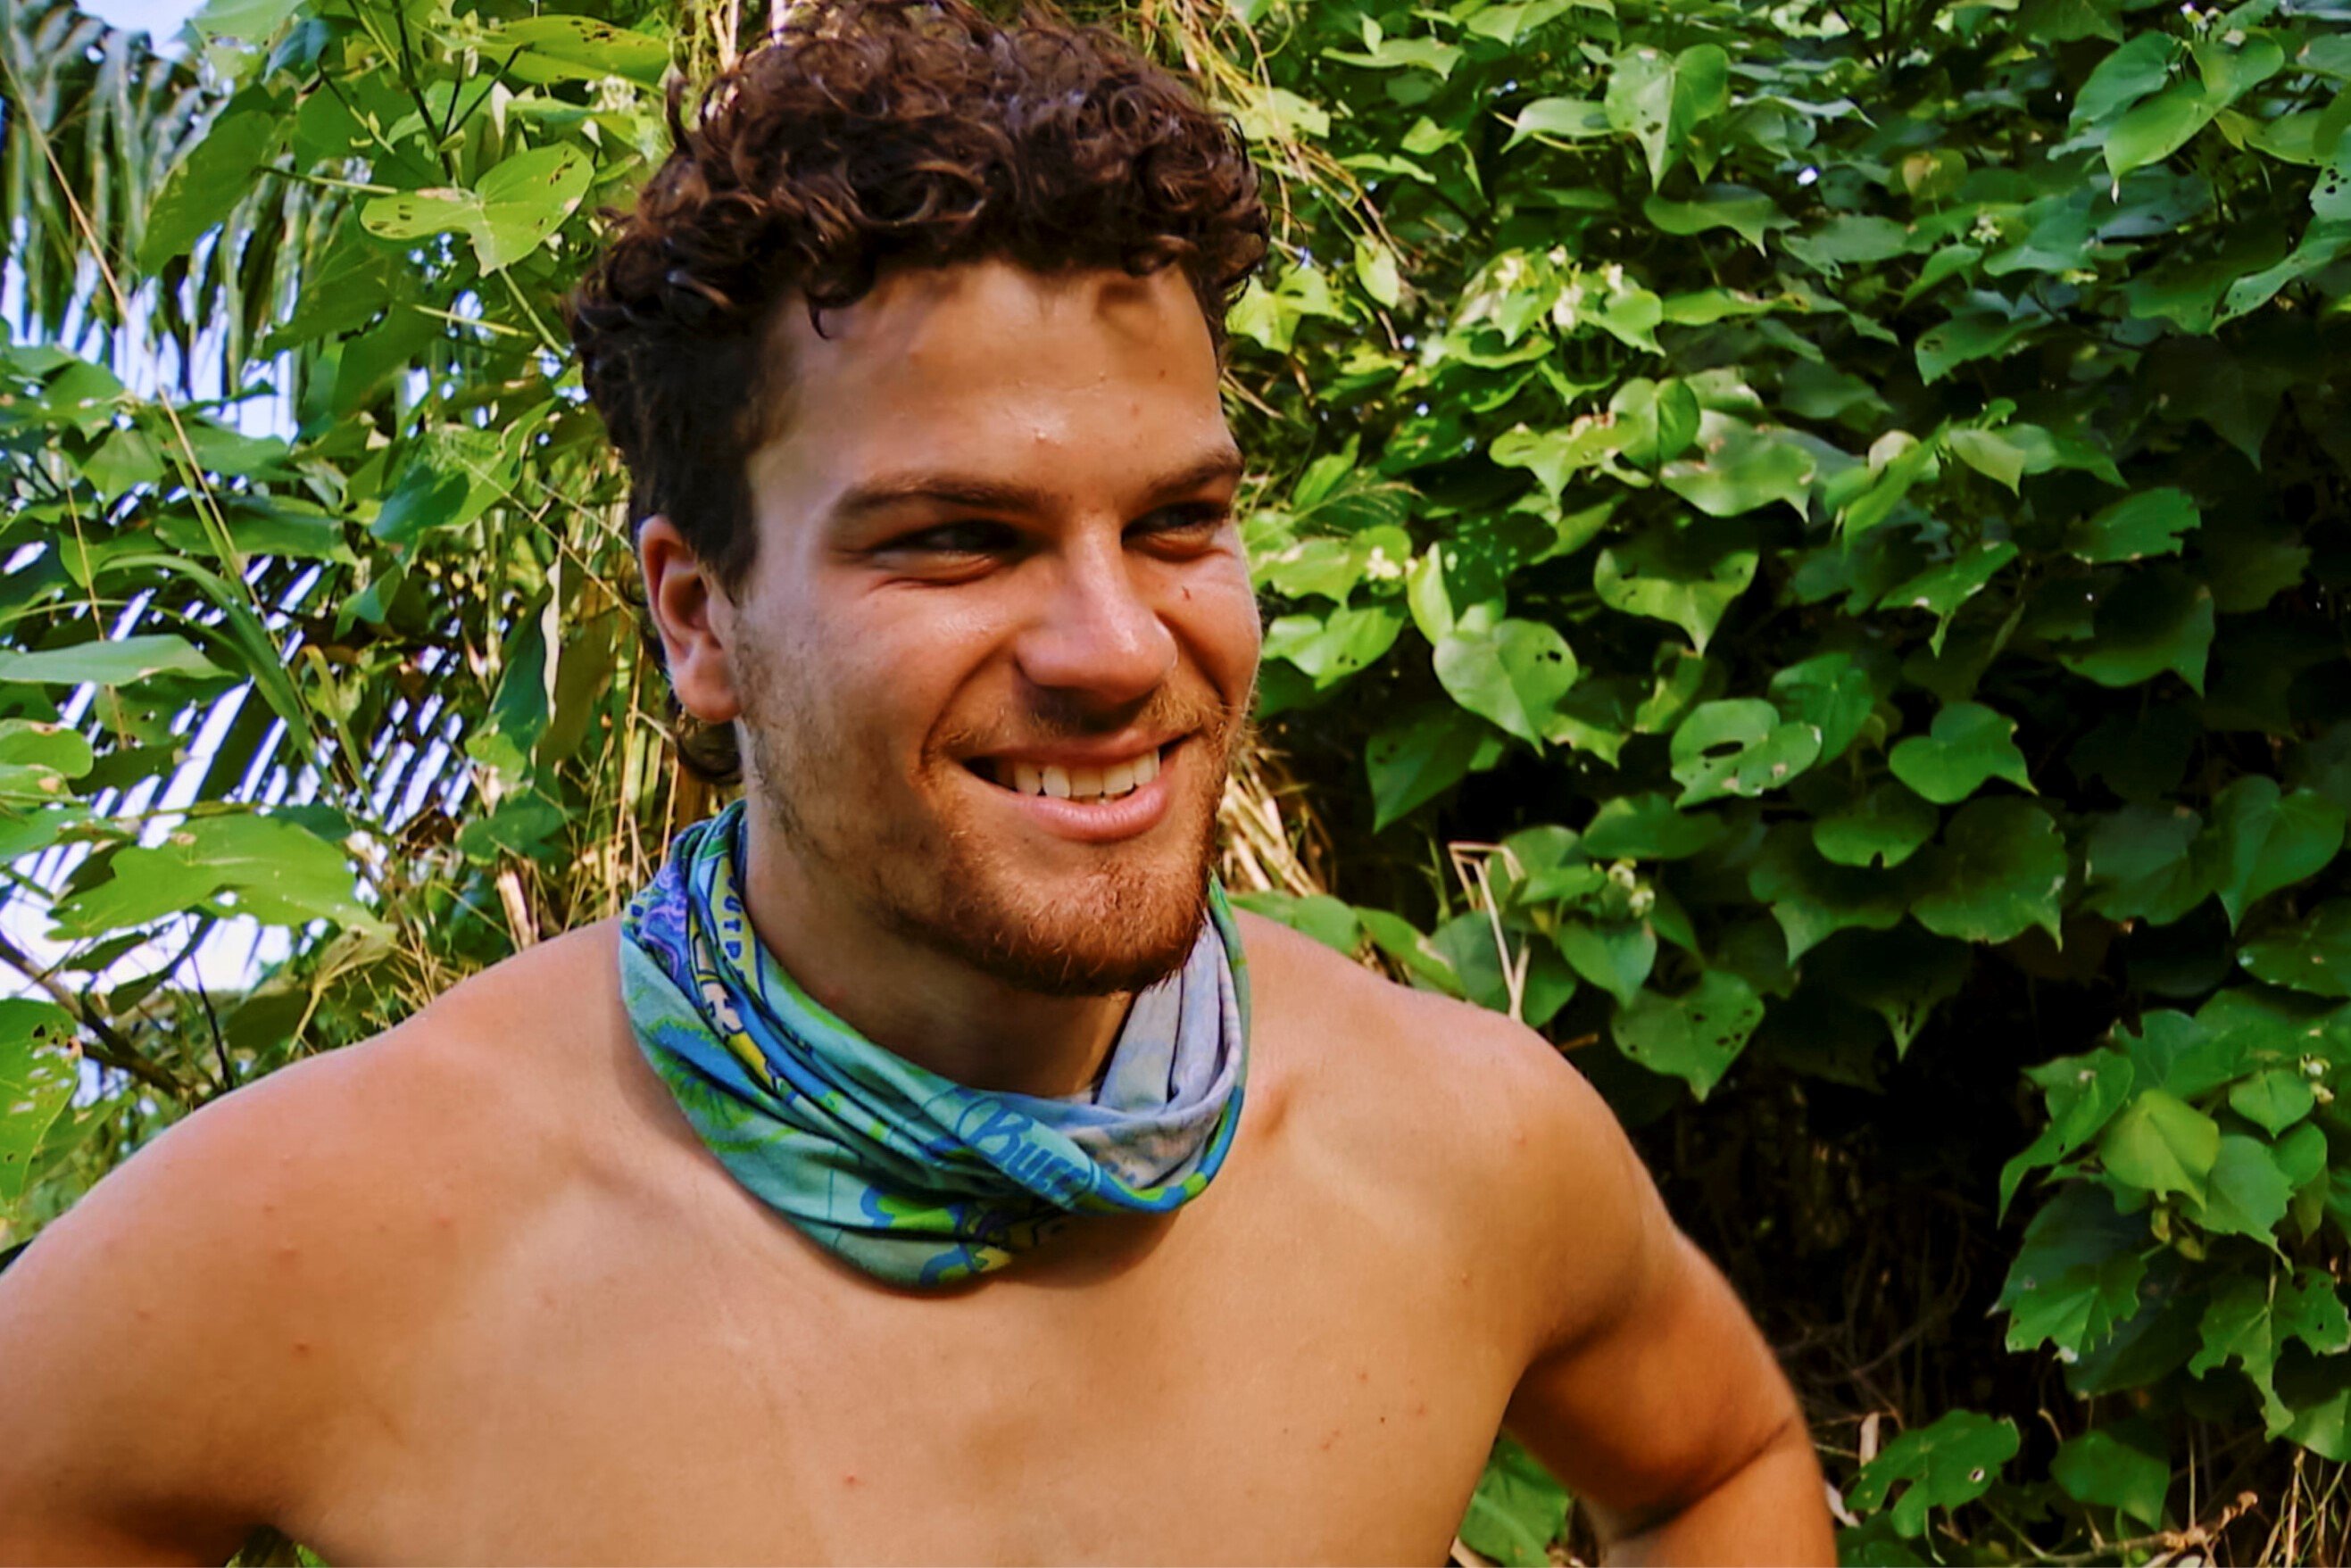 ‘Survivor’: 1 Castaway Reveals the Camera ‘Screws’ With Players Searching for Idols